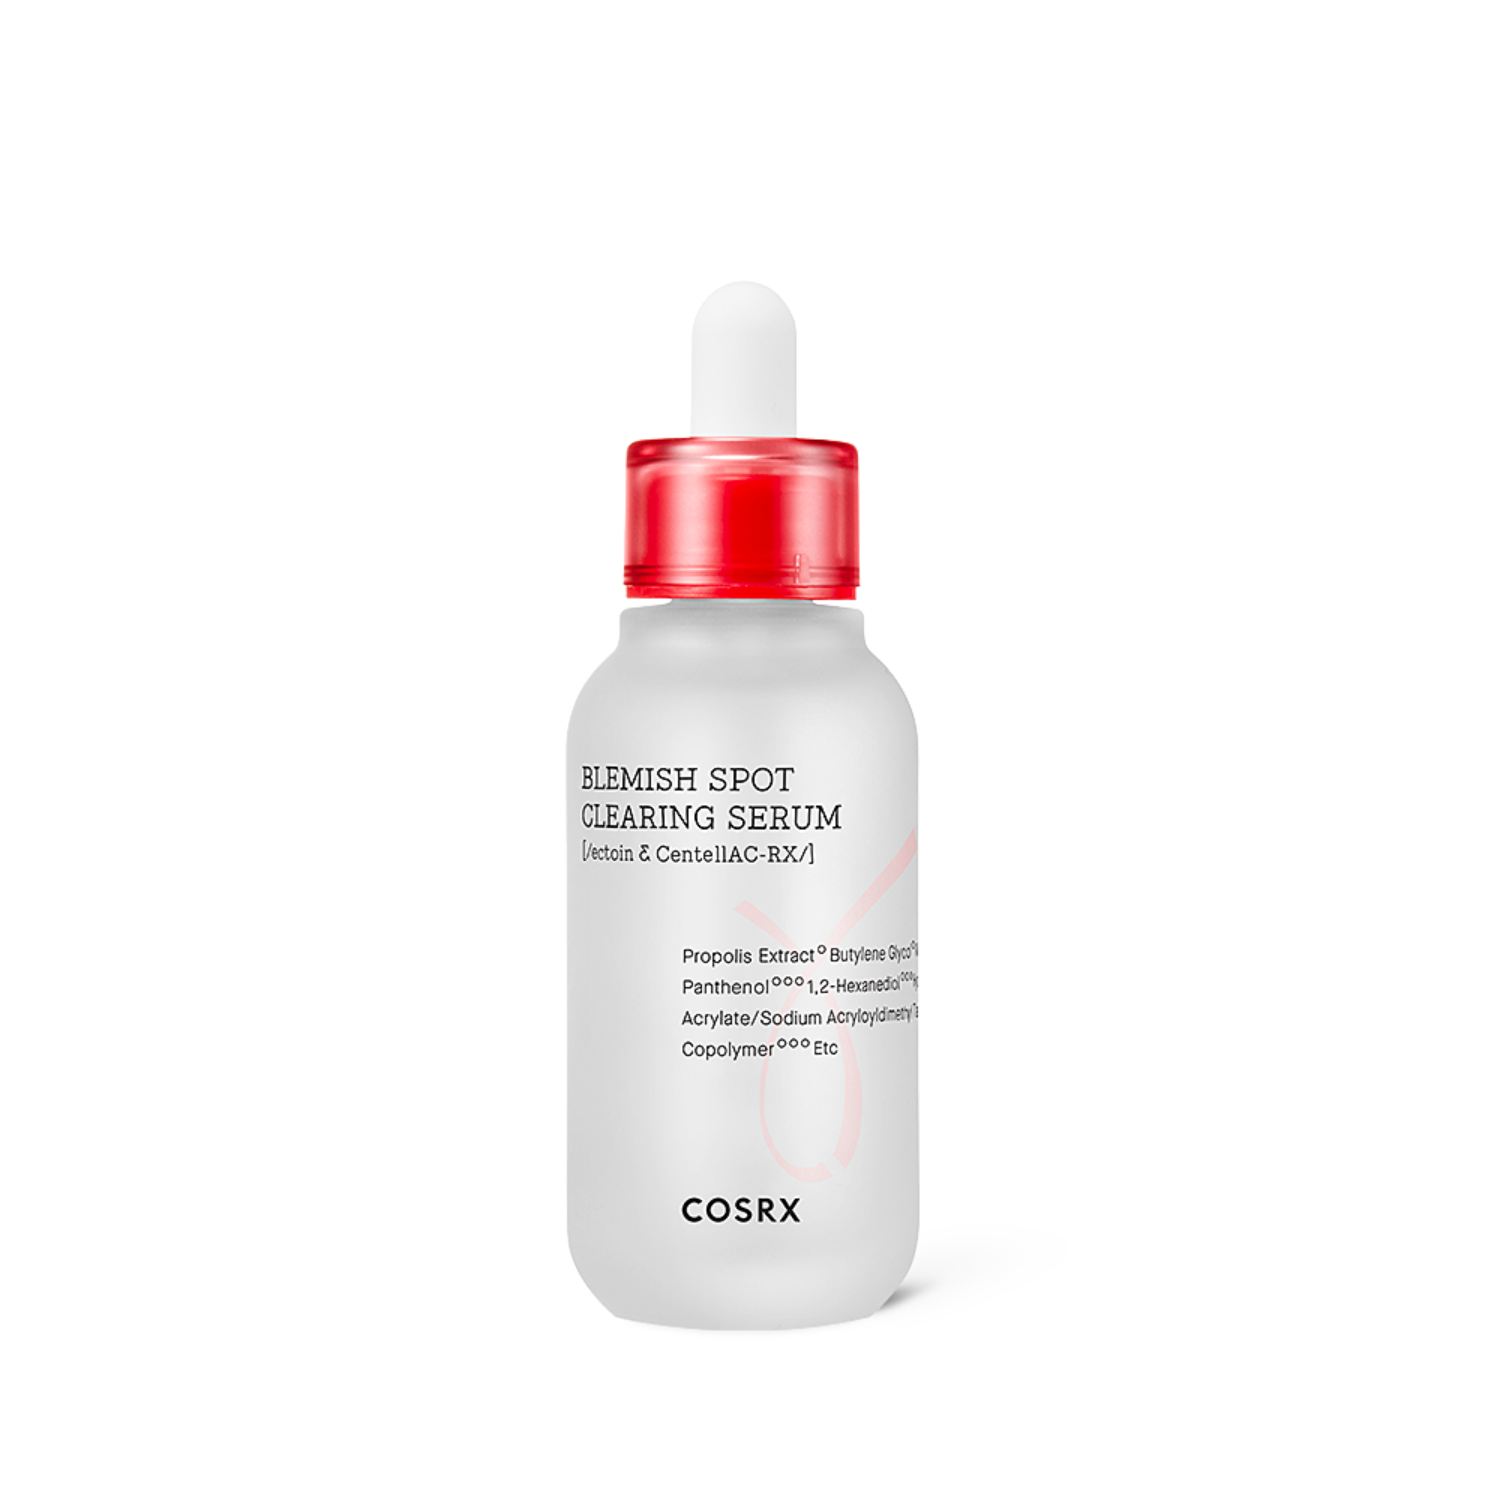 COSRX AC Collection Blemish Spot Clearing Serum 40ml